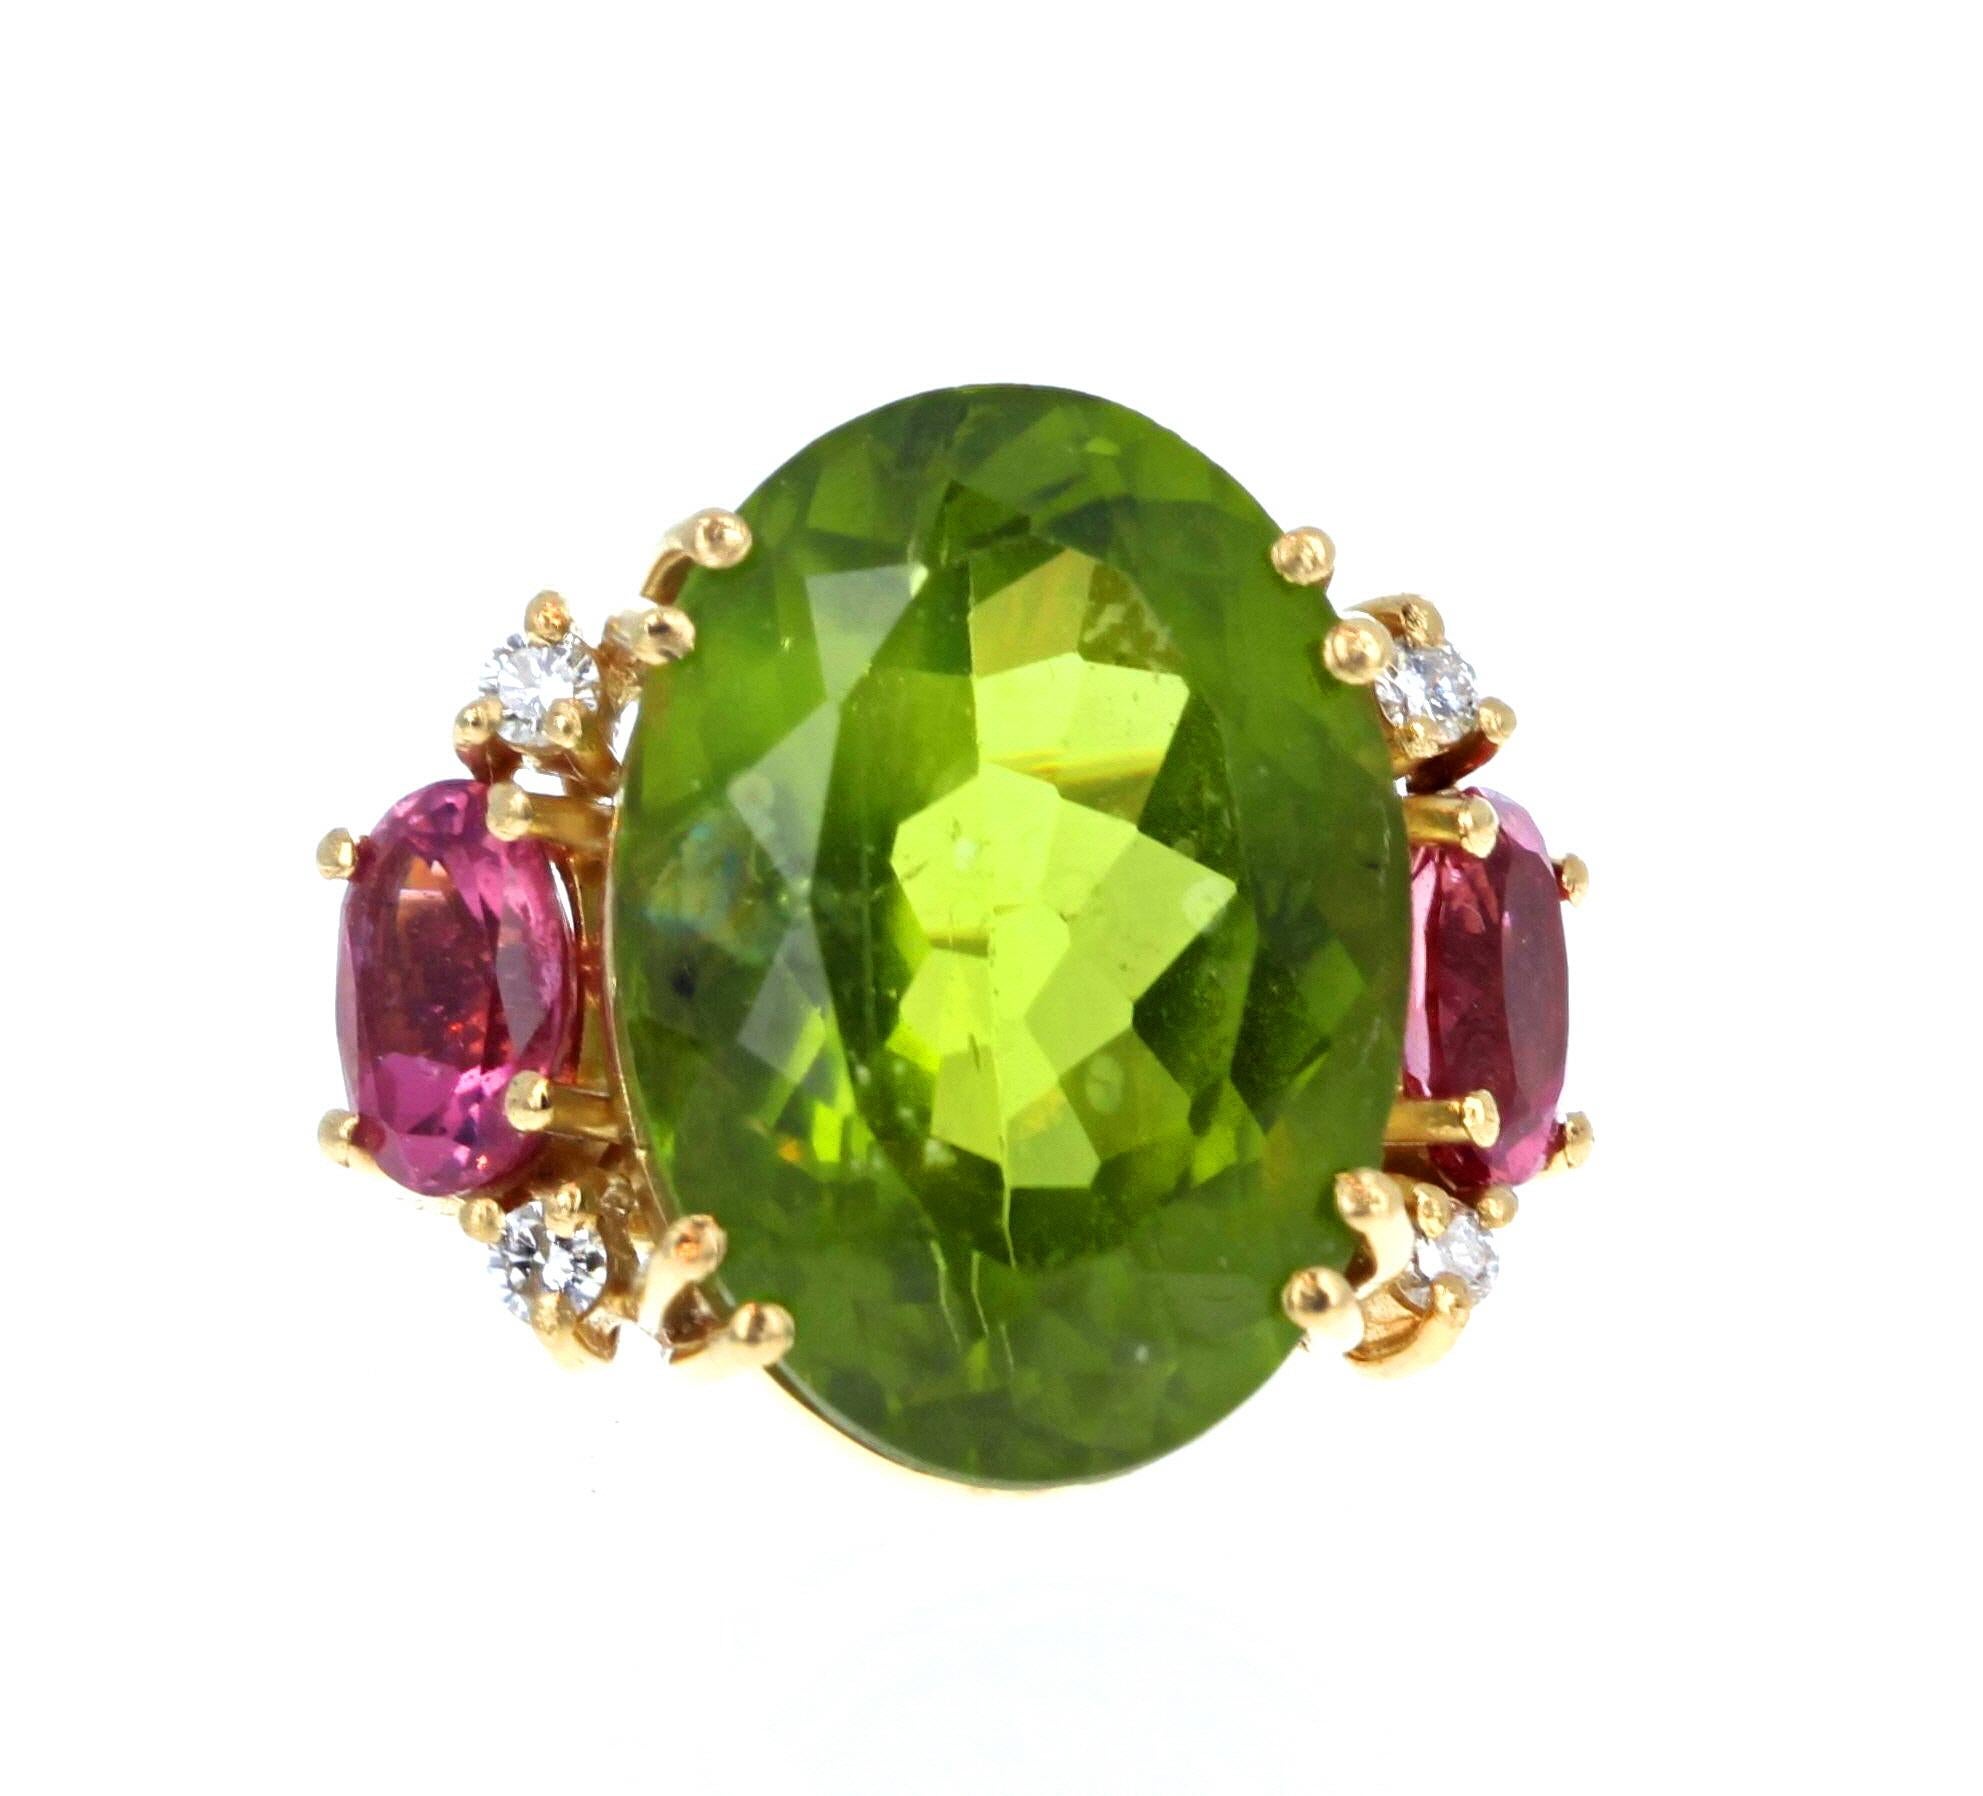 AJD Magnificent Brilliant 14 Ct Green&Pink Tourmalines, Diamonds 18Kt Gold Ring For Sale 4